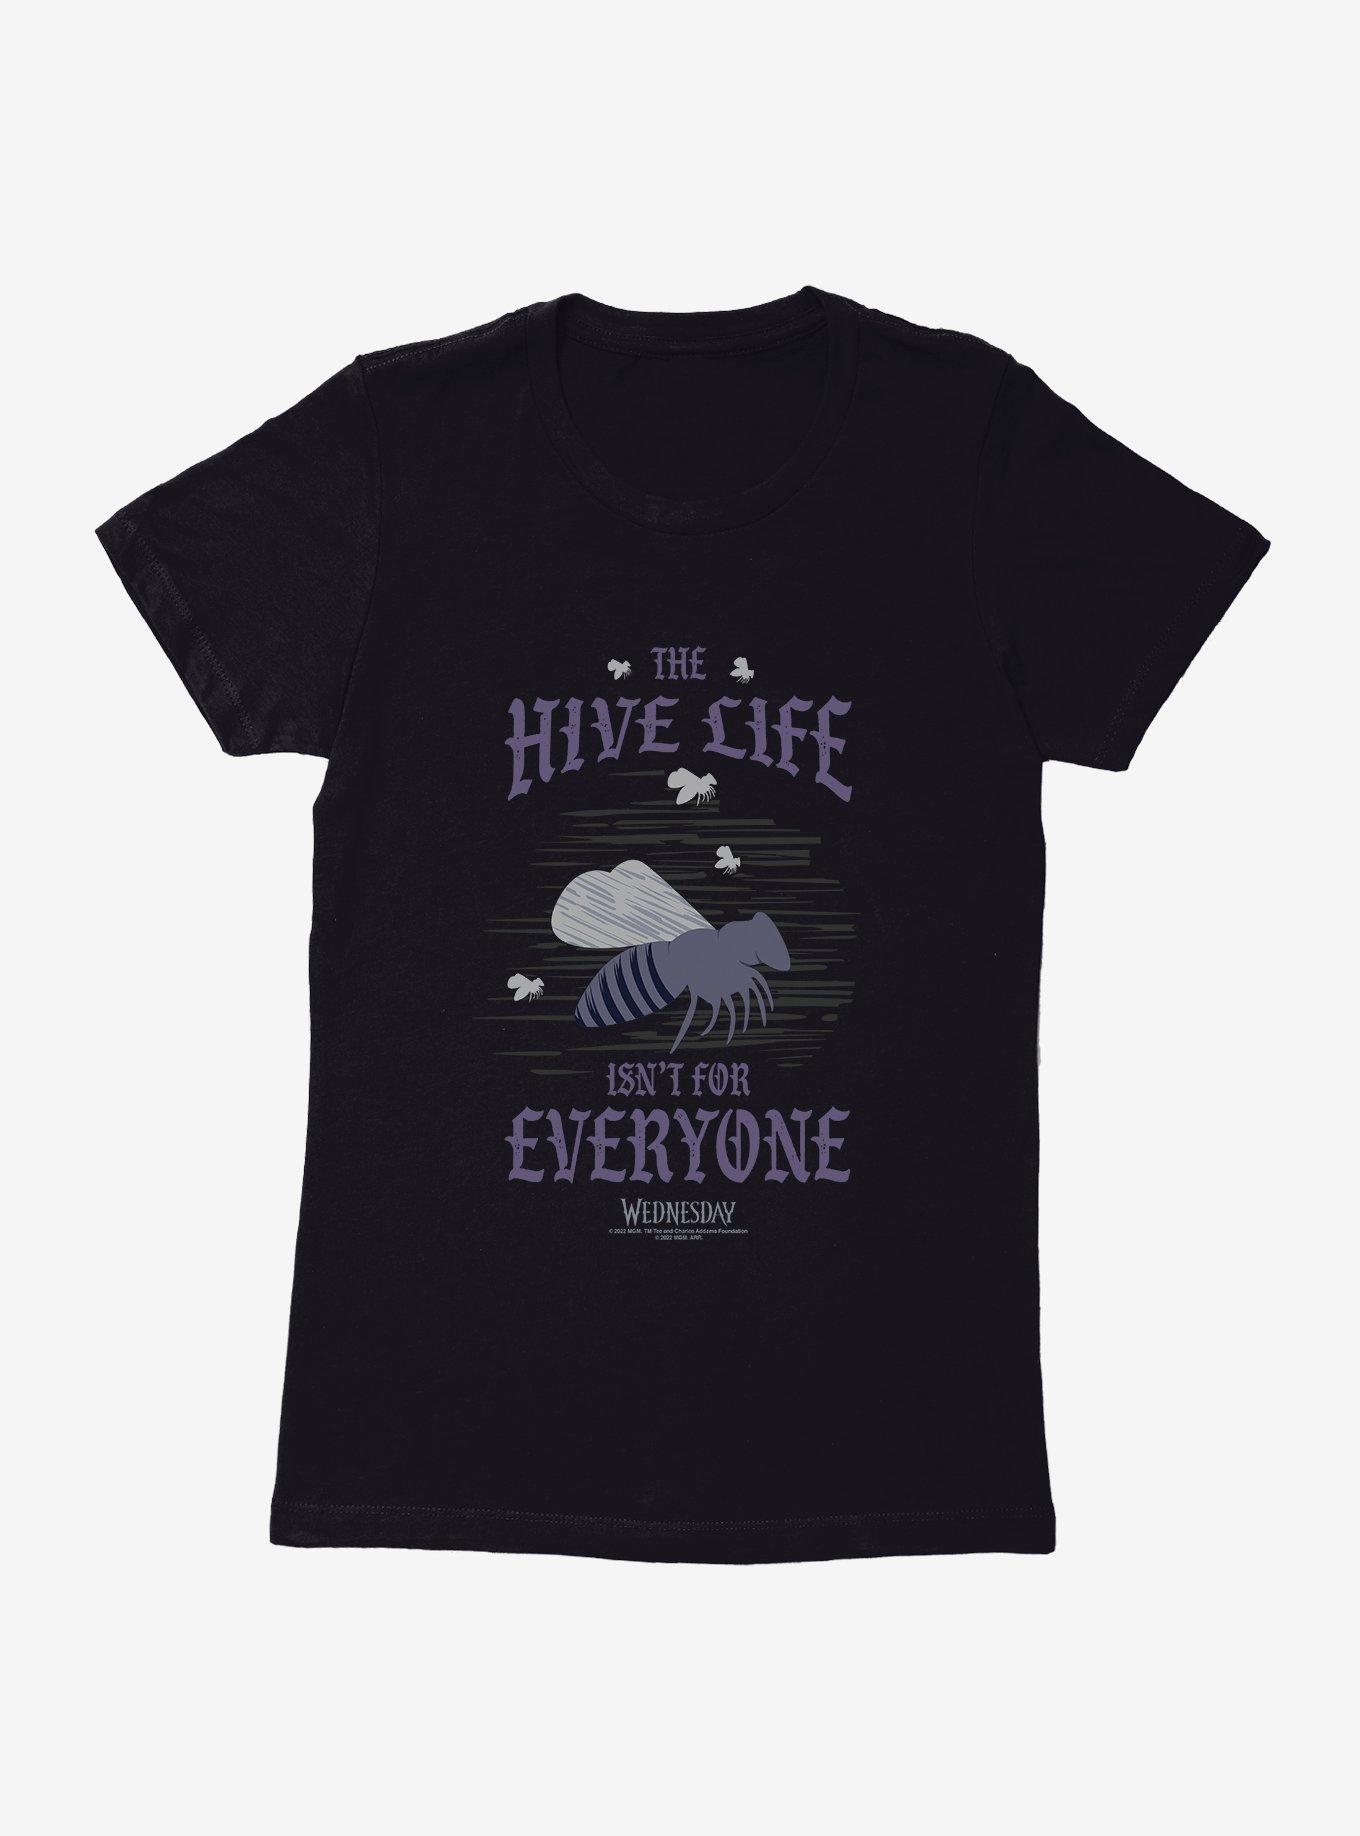 Wednesday The Hive Life Isn't For Everyone Womens T-Shirt, BLACK, hi-res